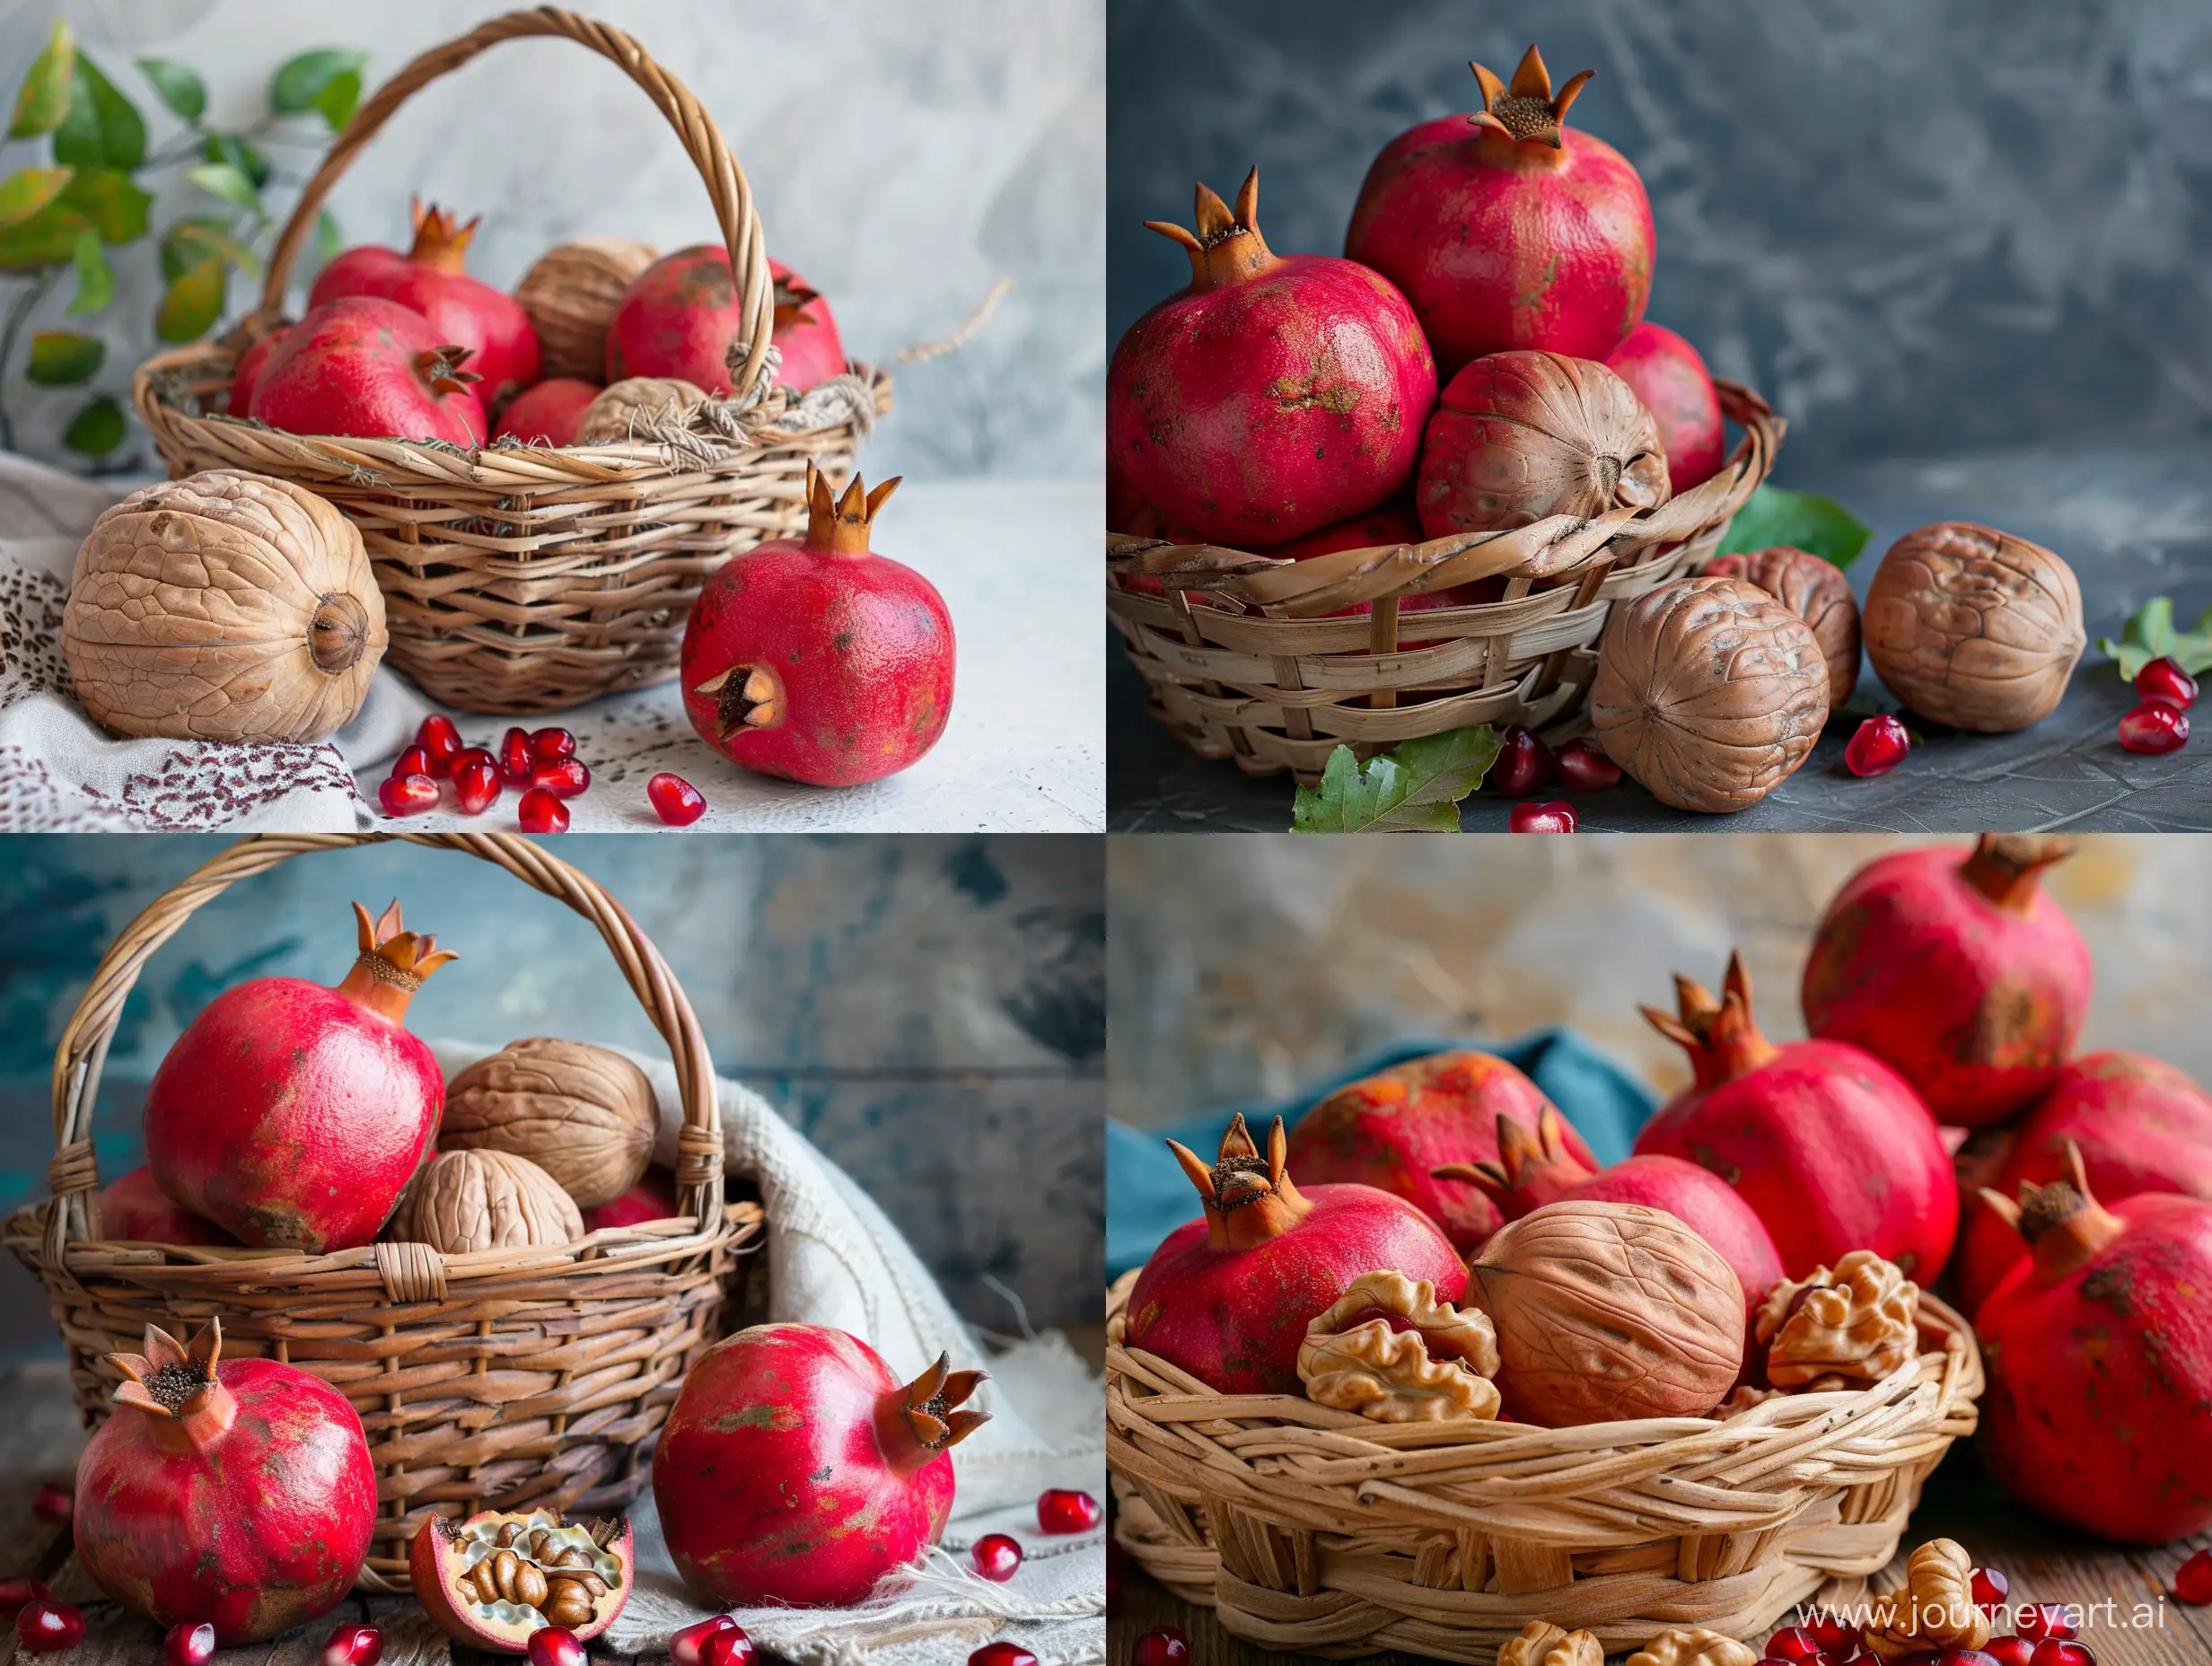 Natural and real photo of a walnut basket. A few red pomegranates